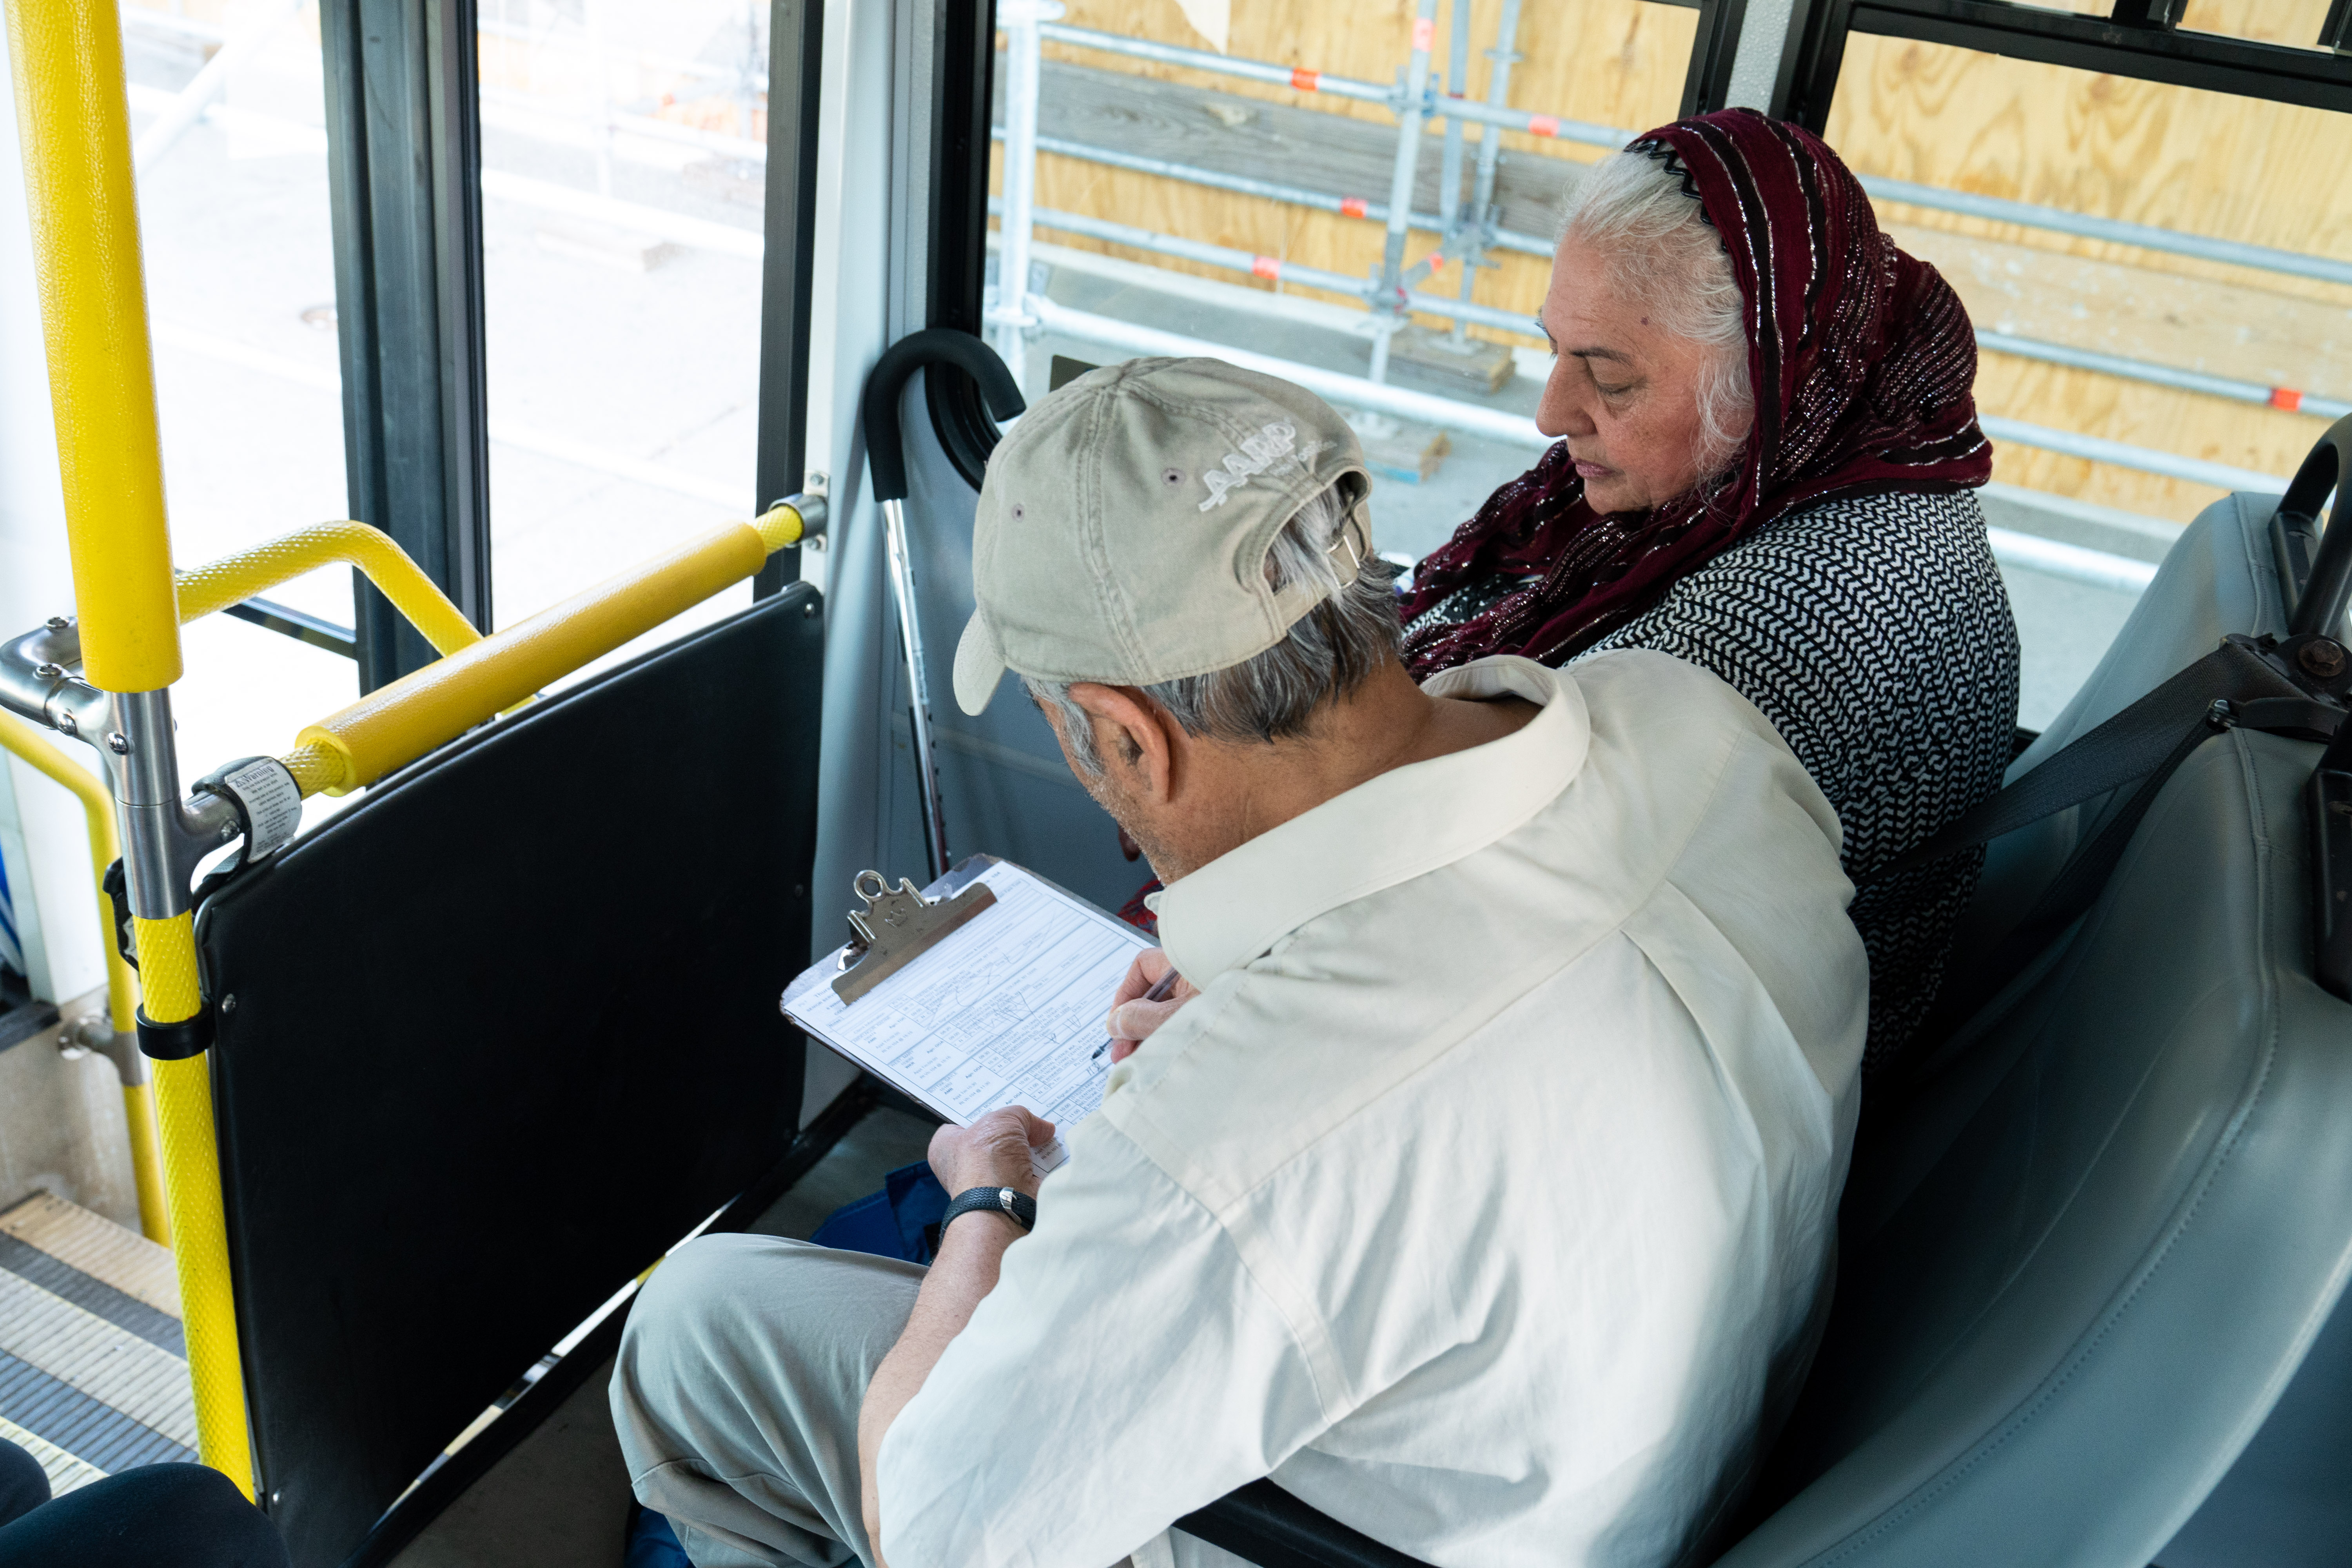 Couple seated on bus writing on clipboard 